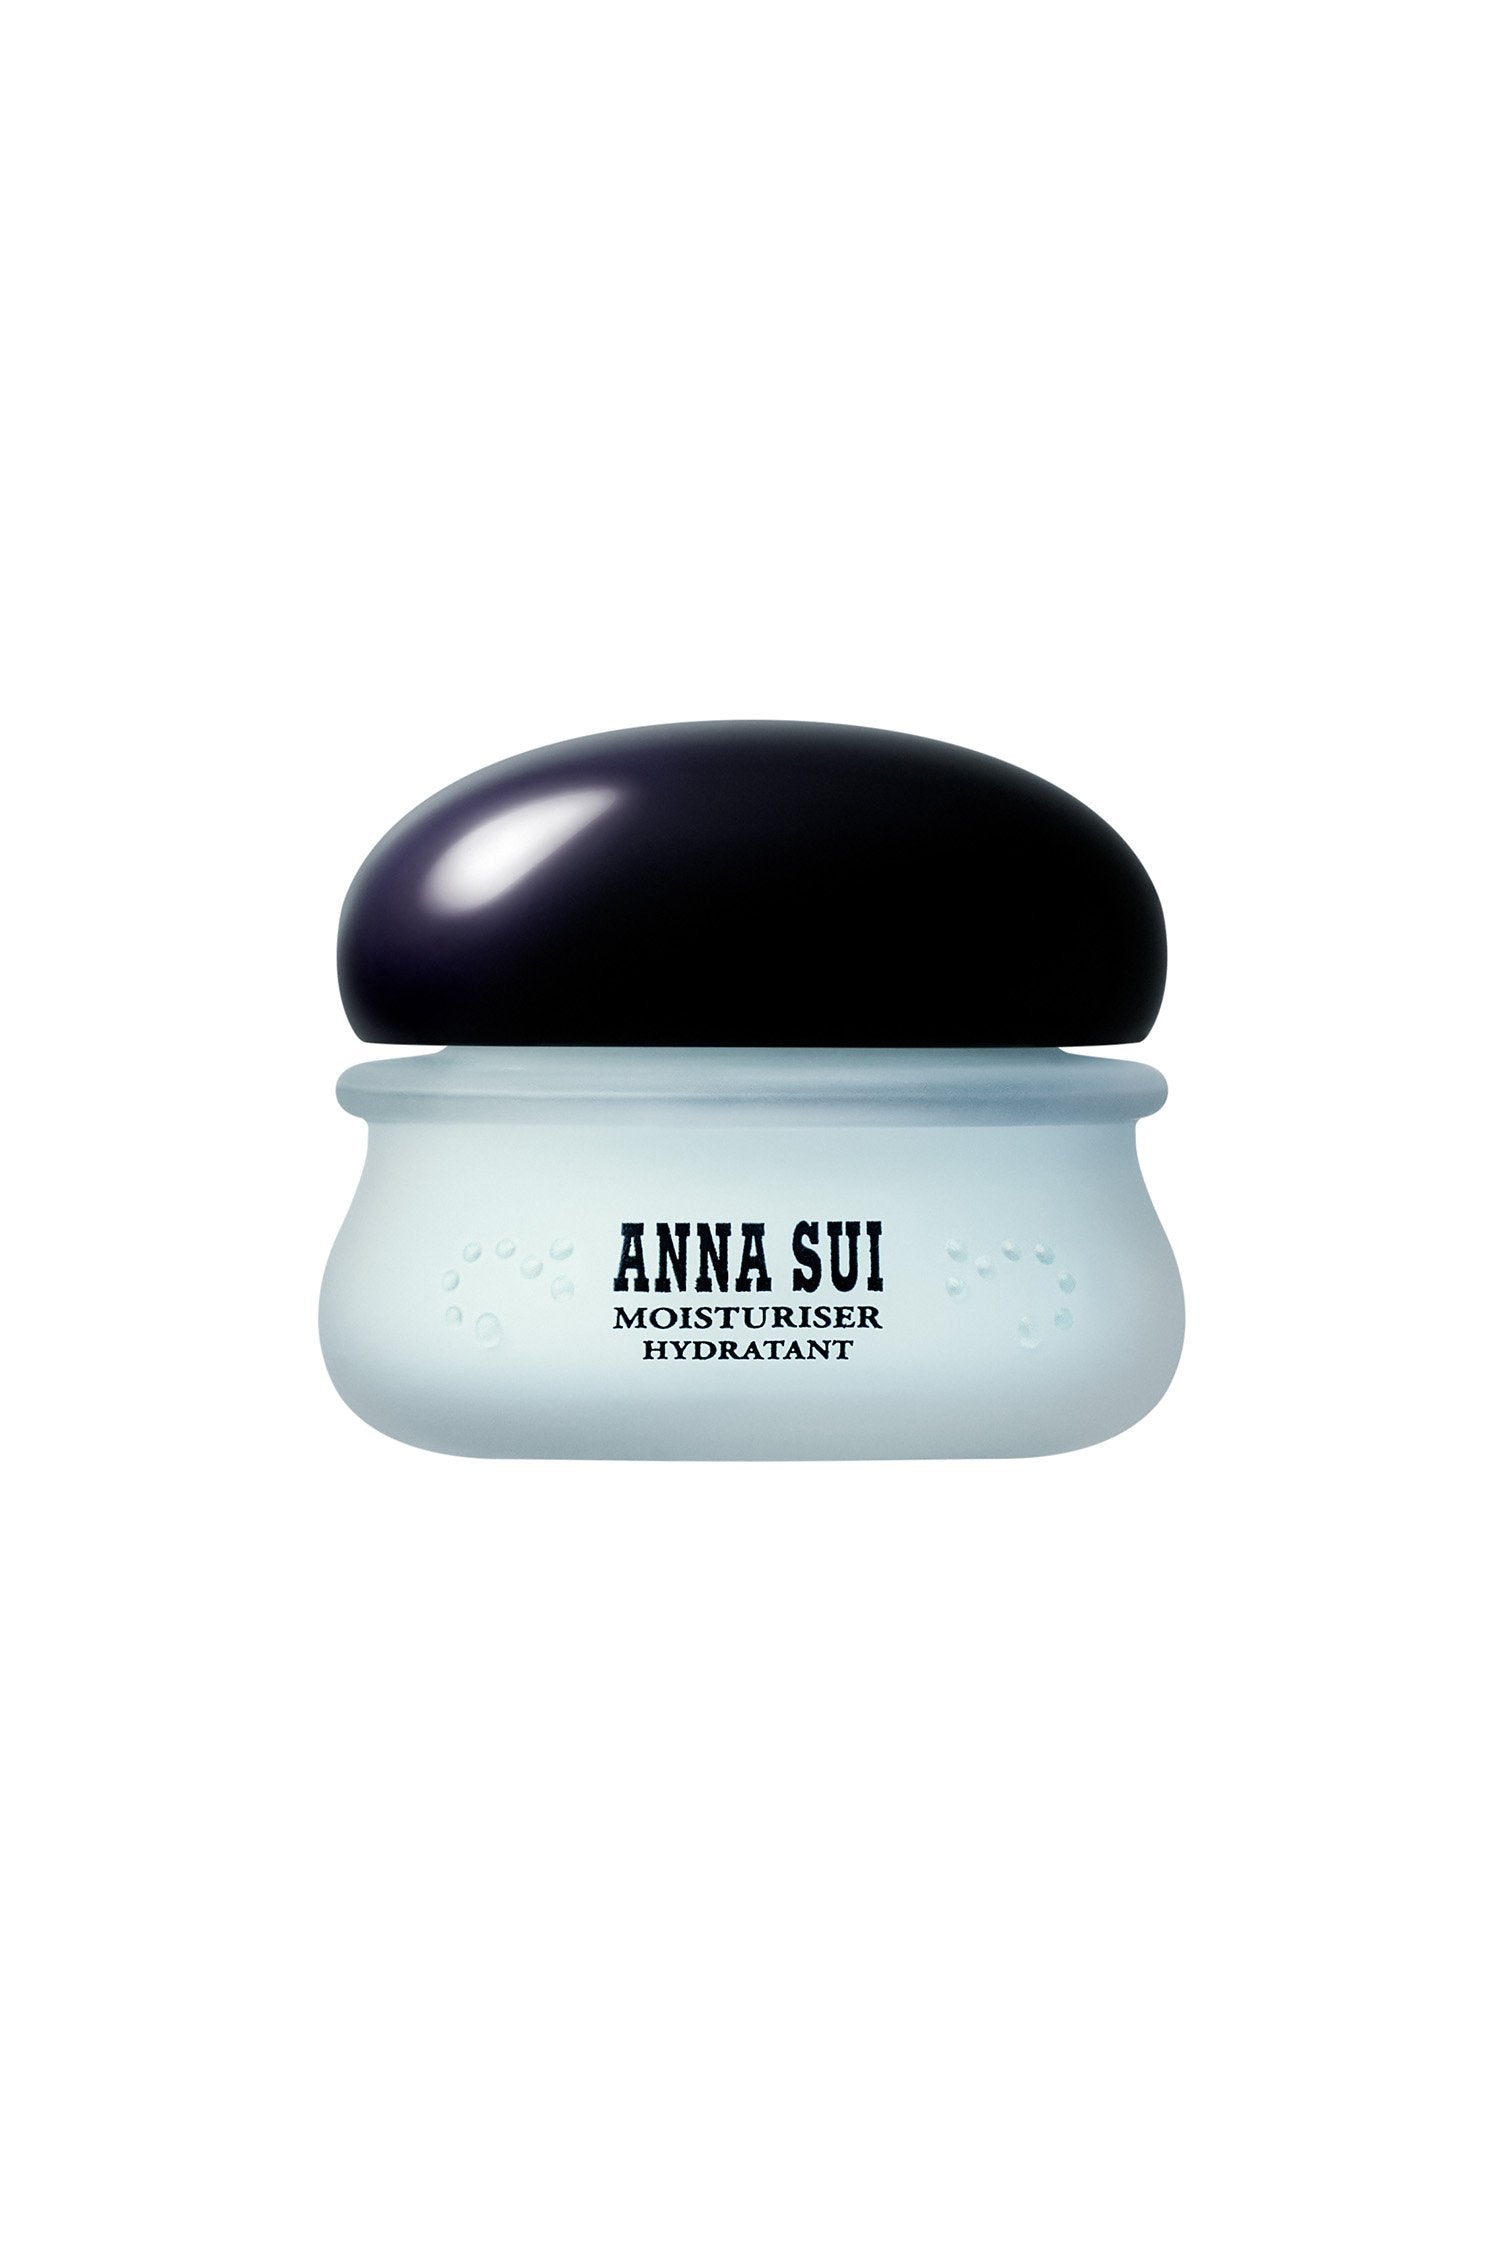 Moisturizer is in a bluish round container a black rounded lid, Anna Sui, Moisturizer Hydratant branding on the container